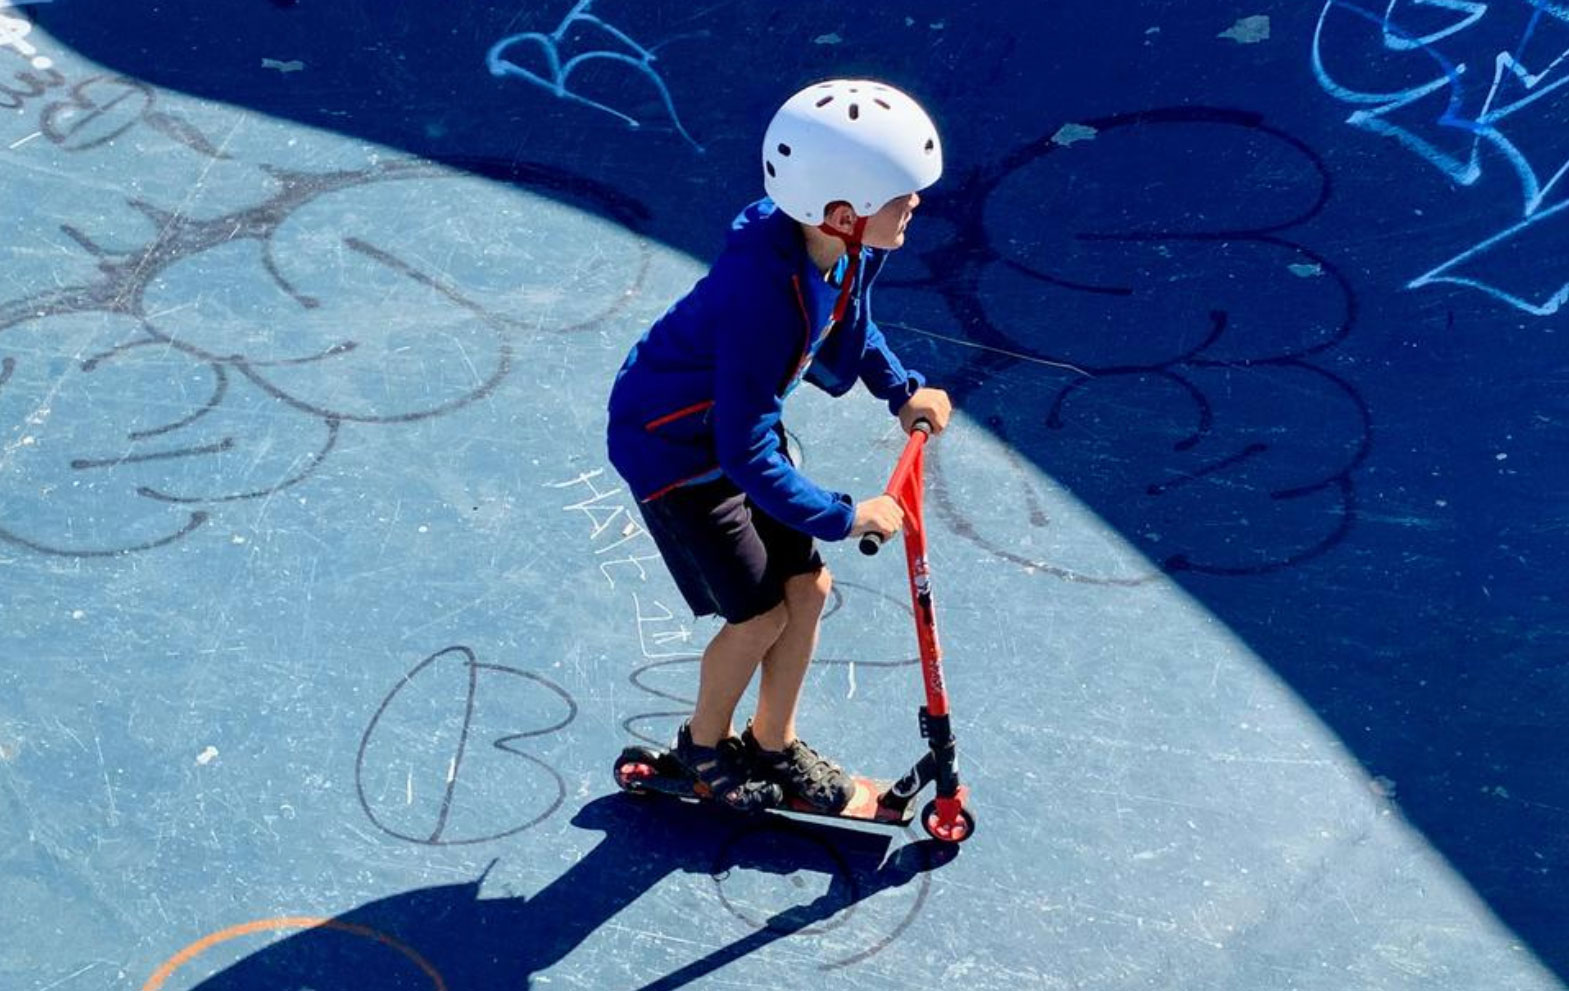 Little boy, wearing a helmet, rides his scooter on a skater training ground